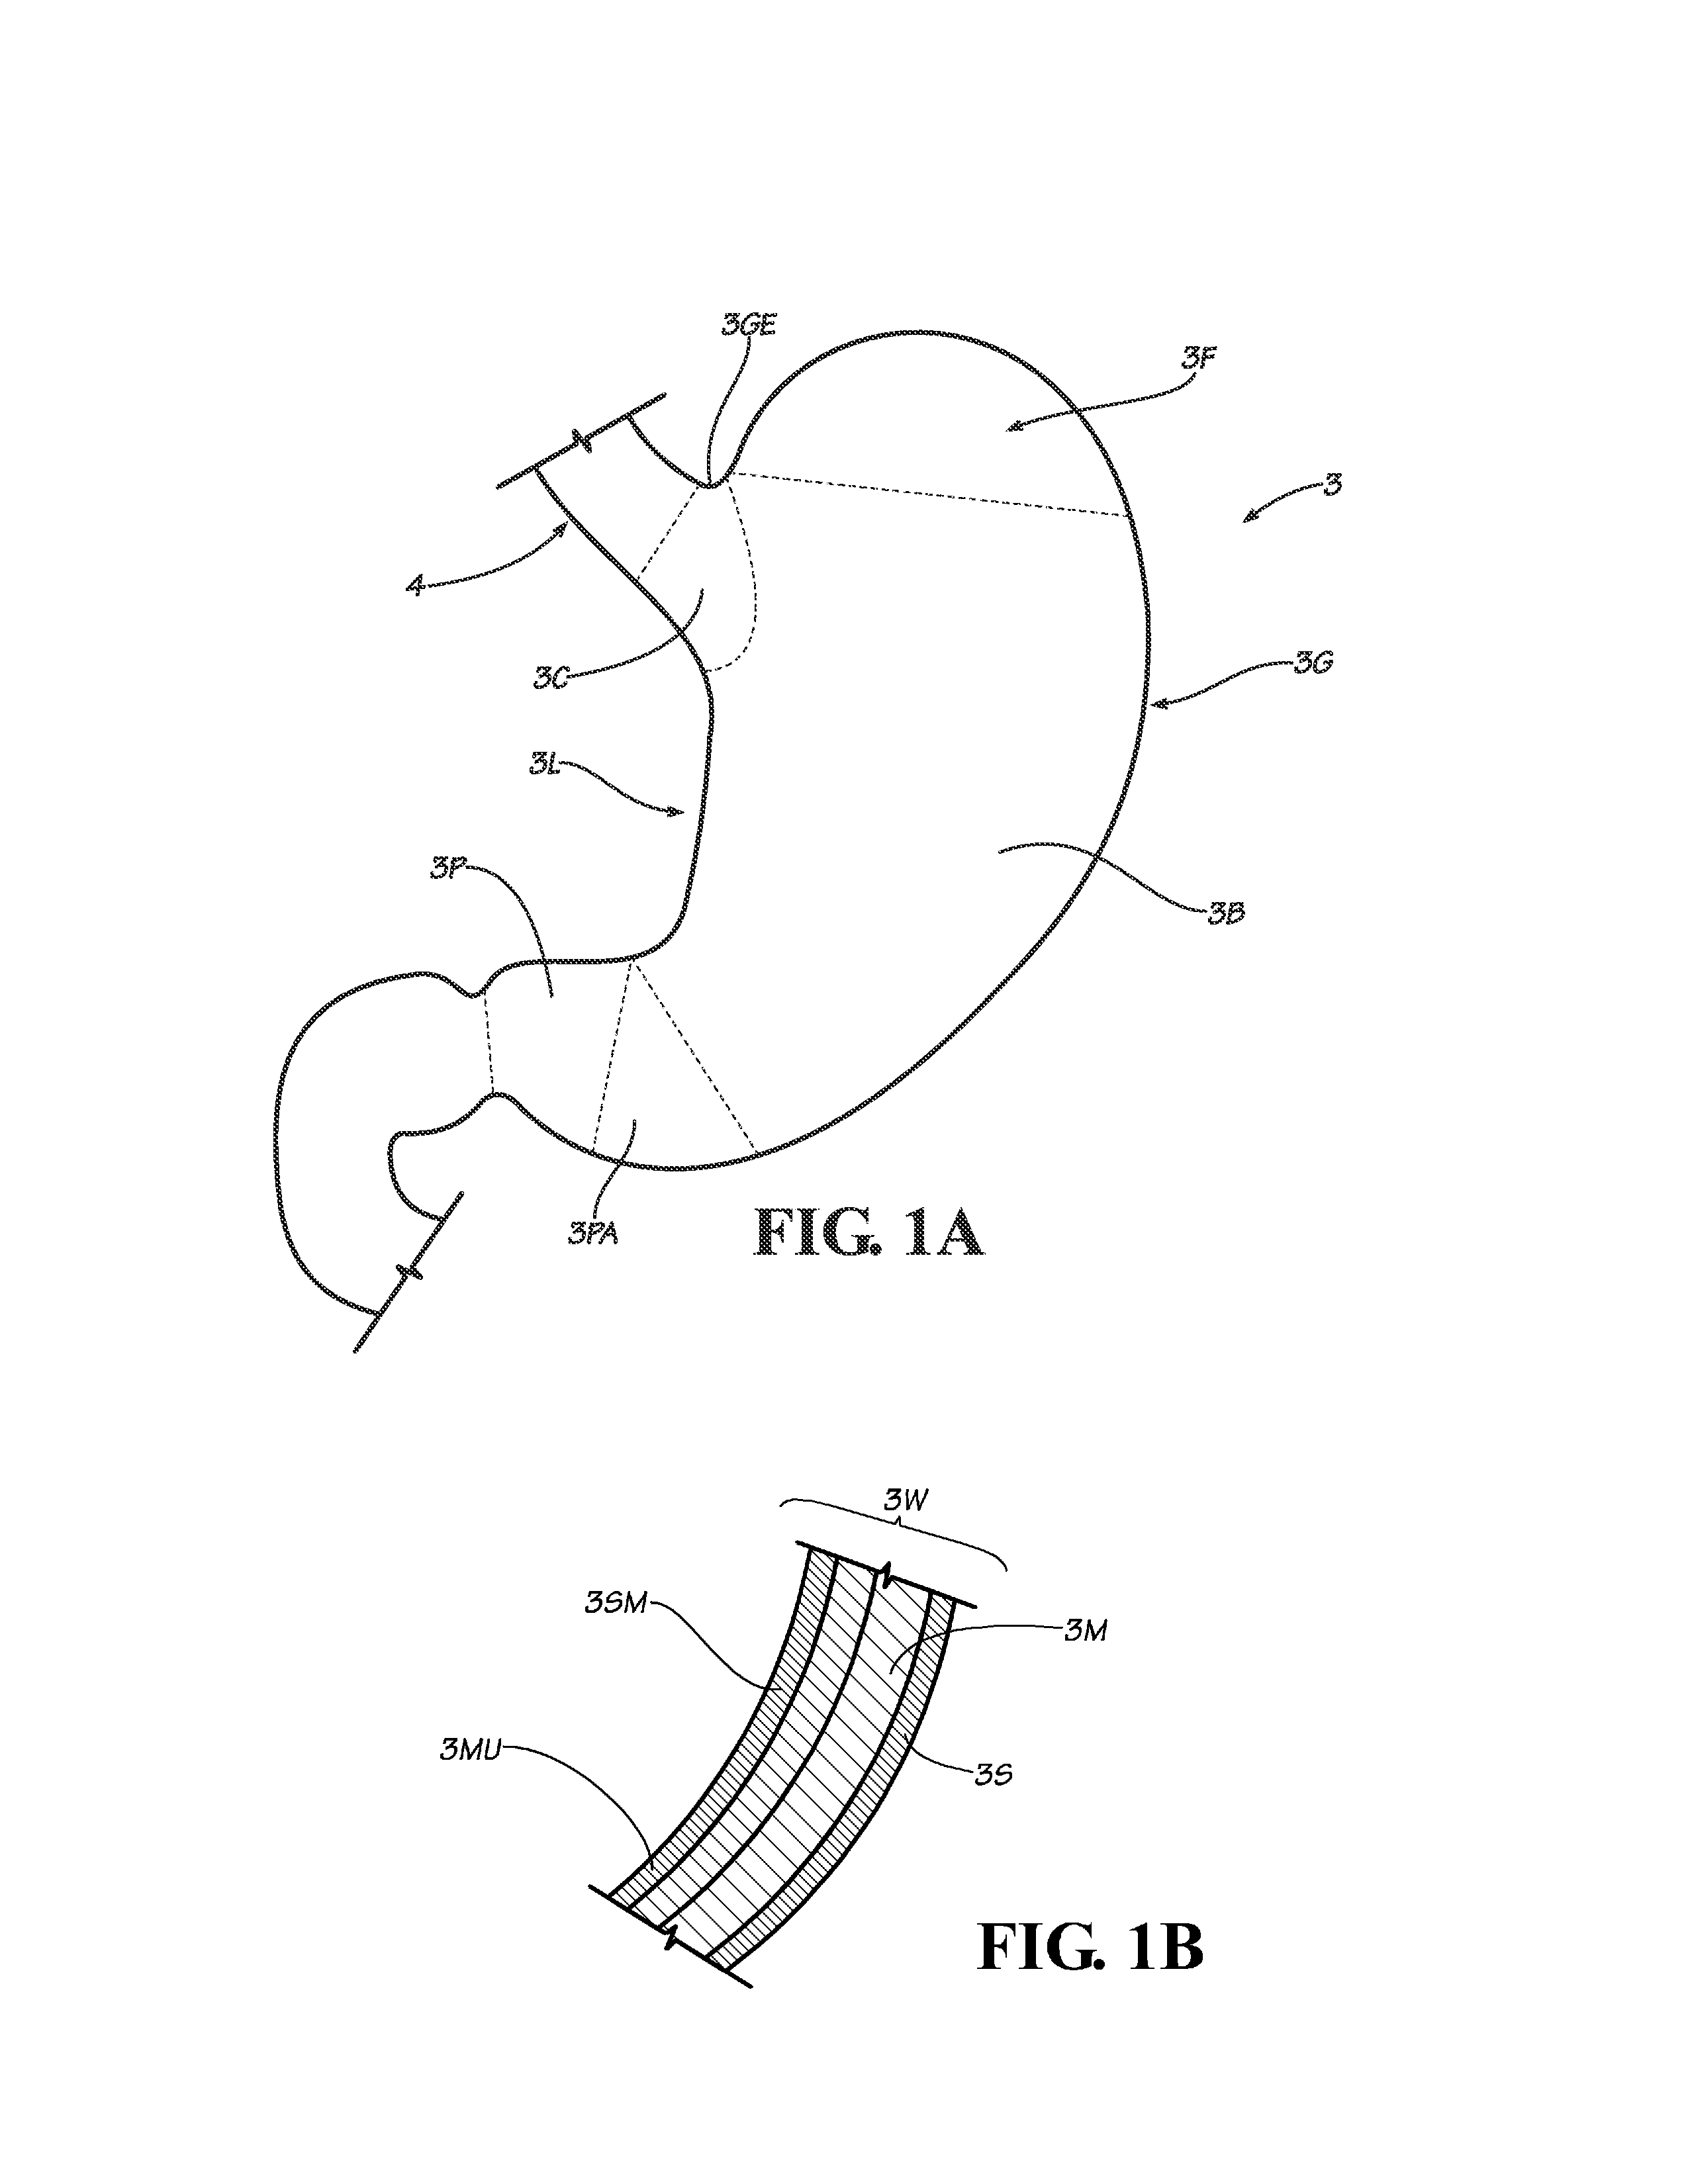 Methods, Instruments and Devices for Extragastric Reduction of Stomach Volume